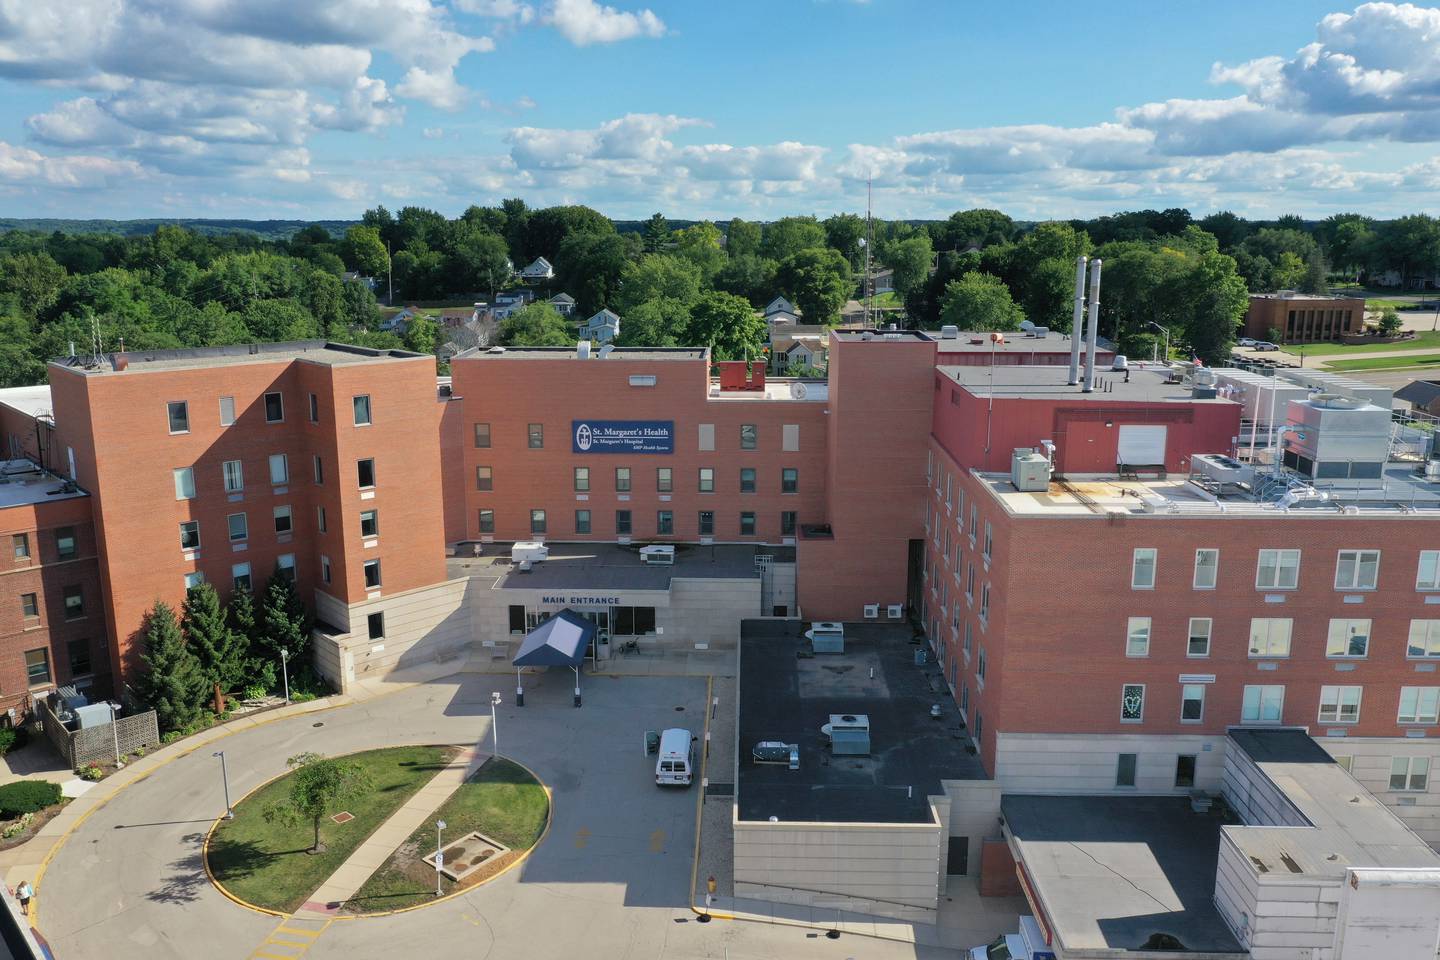 St. Margaret’s is putting on hold its application to discontinue emergency and inpatient services at St. Margaret’s Health in Spring Valley, in hopes of pursuing a new designation that would maintain emergency care at both its Spring Valley and Peru hospitals.